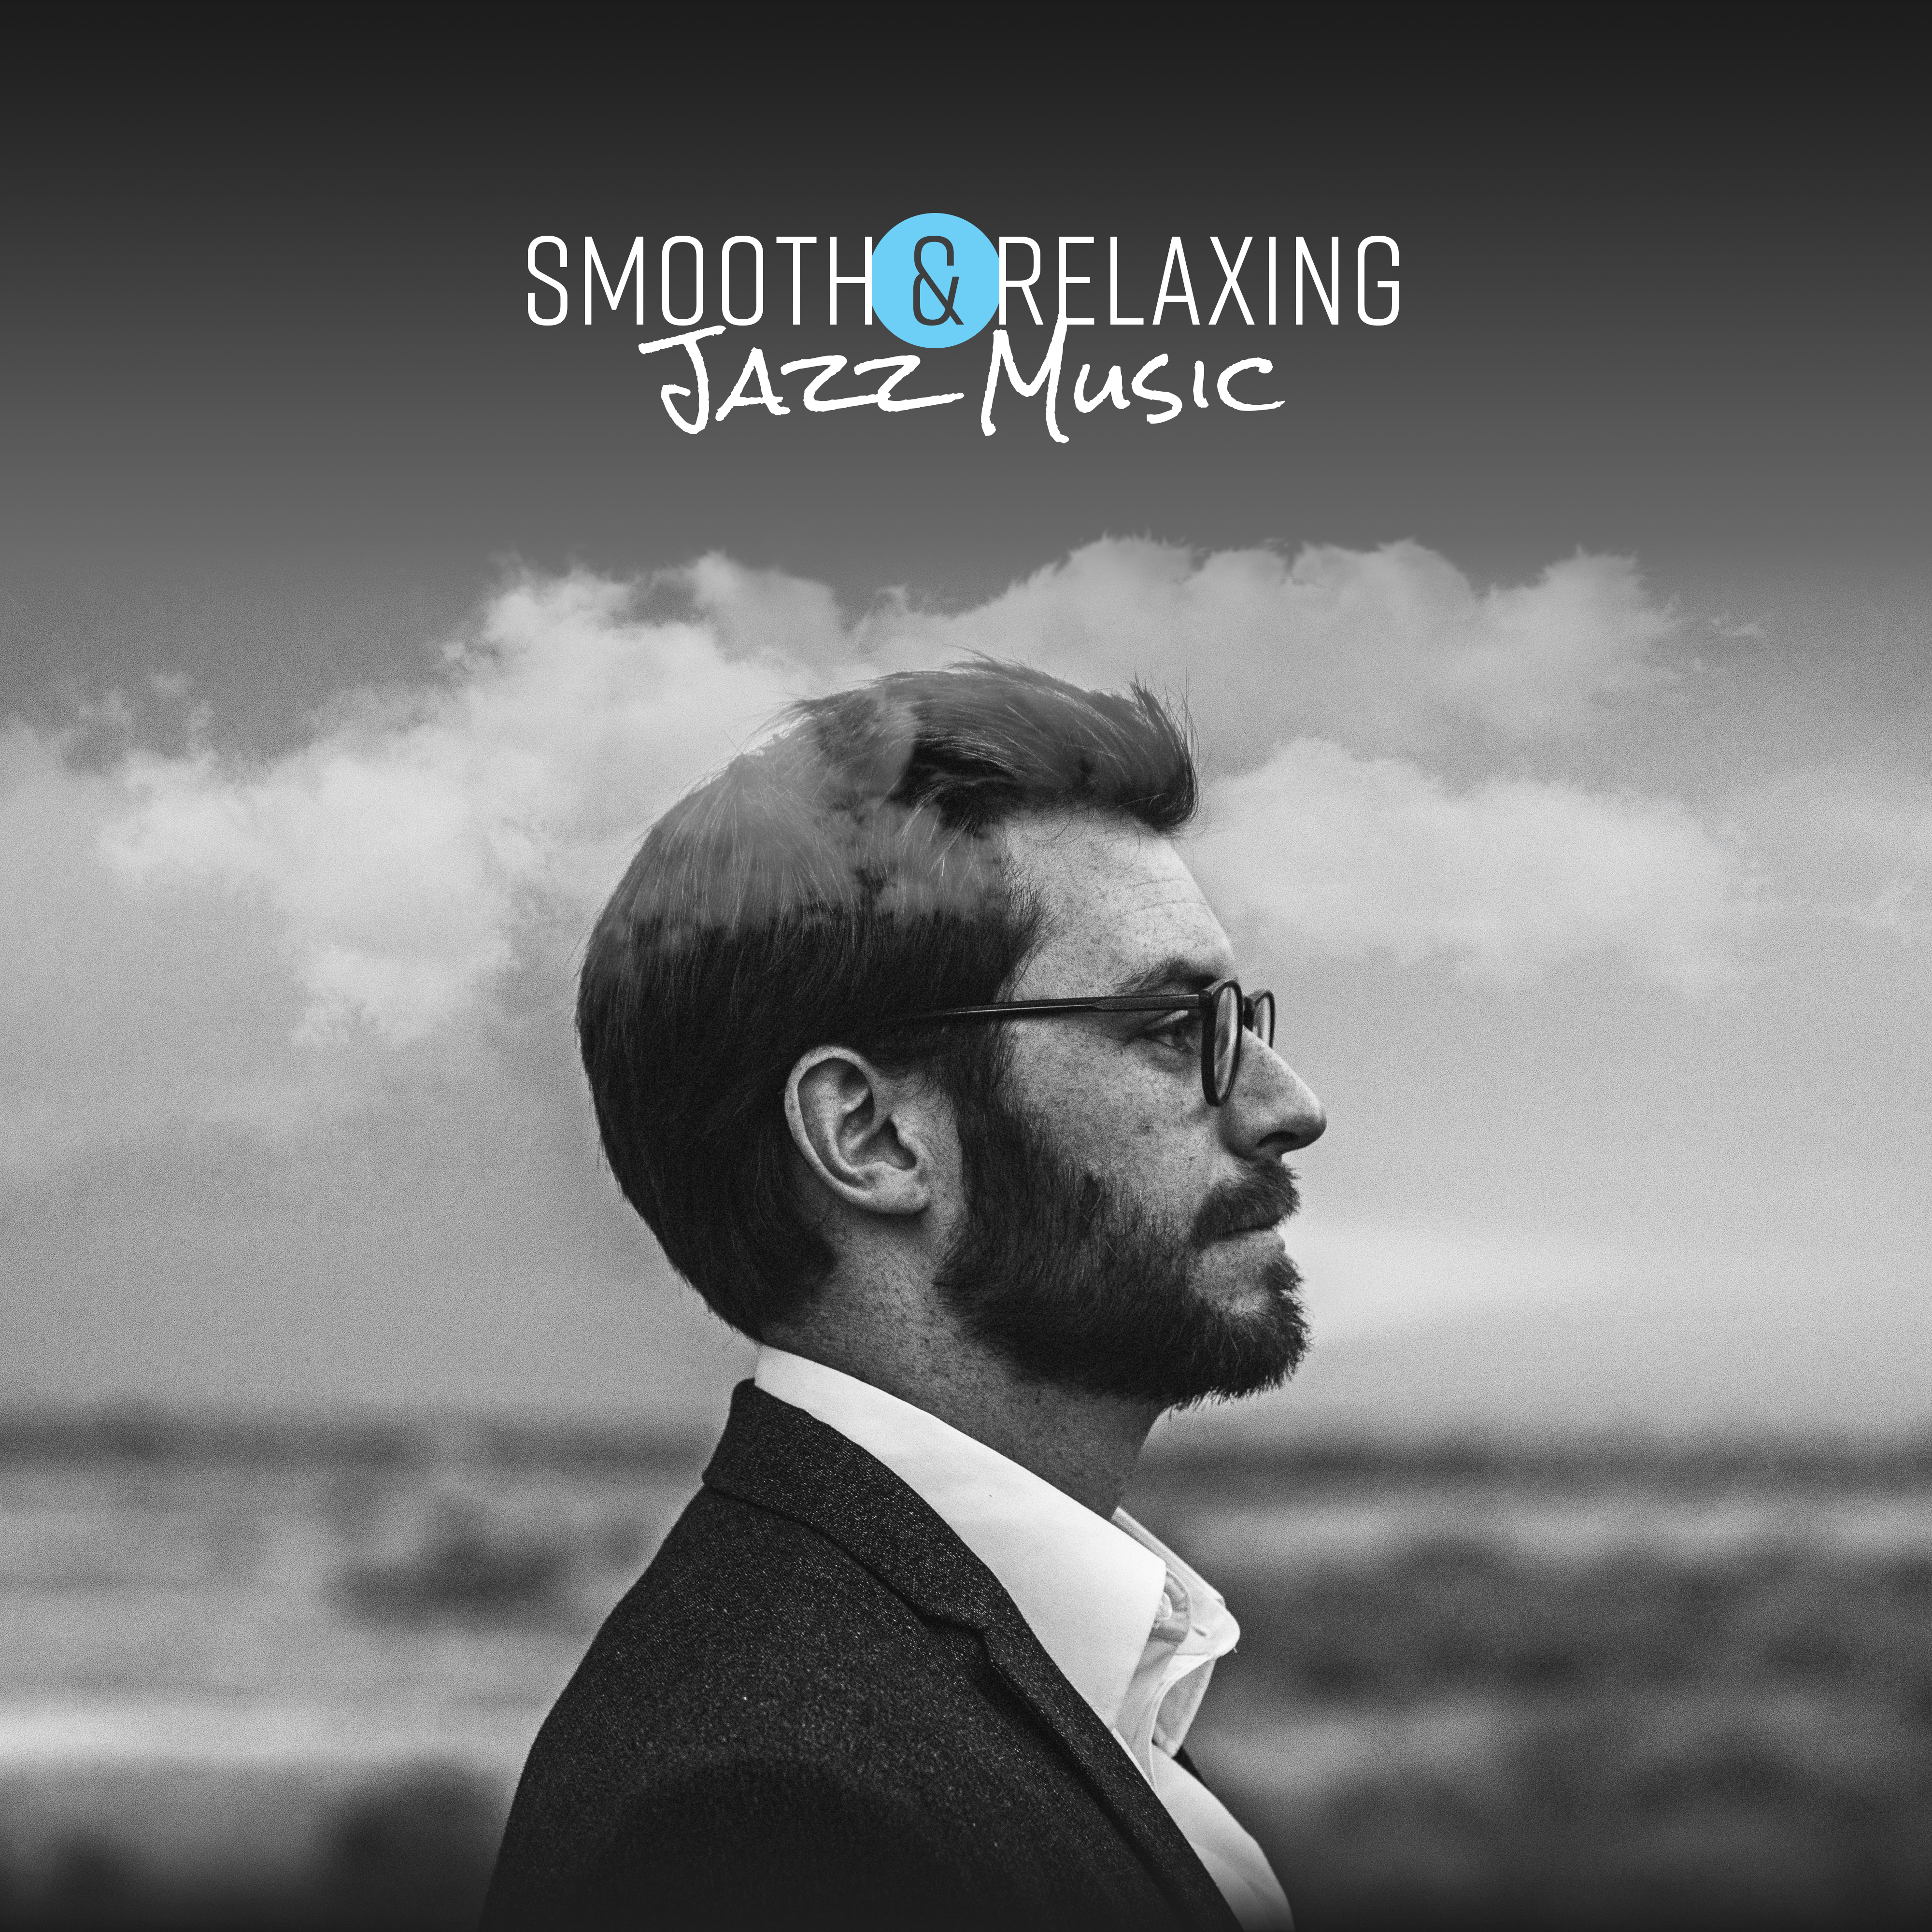 Smooth & Relaxing Jazz Music